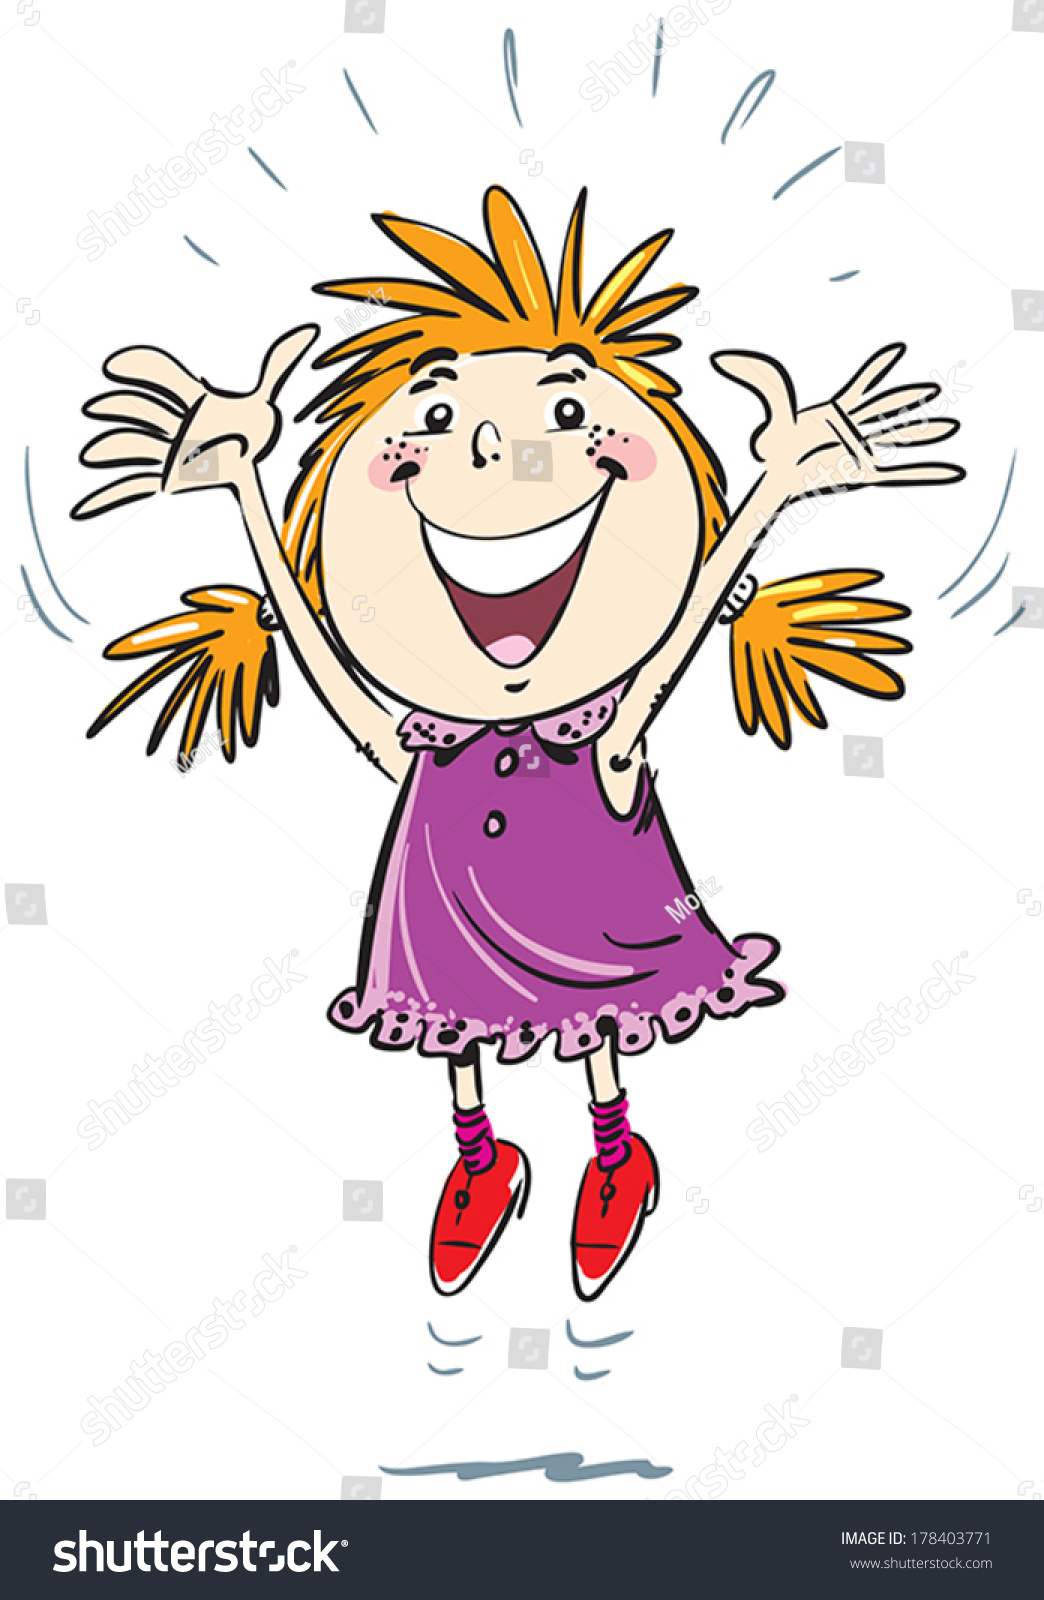 clipart woman jumping up and down - photo #47